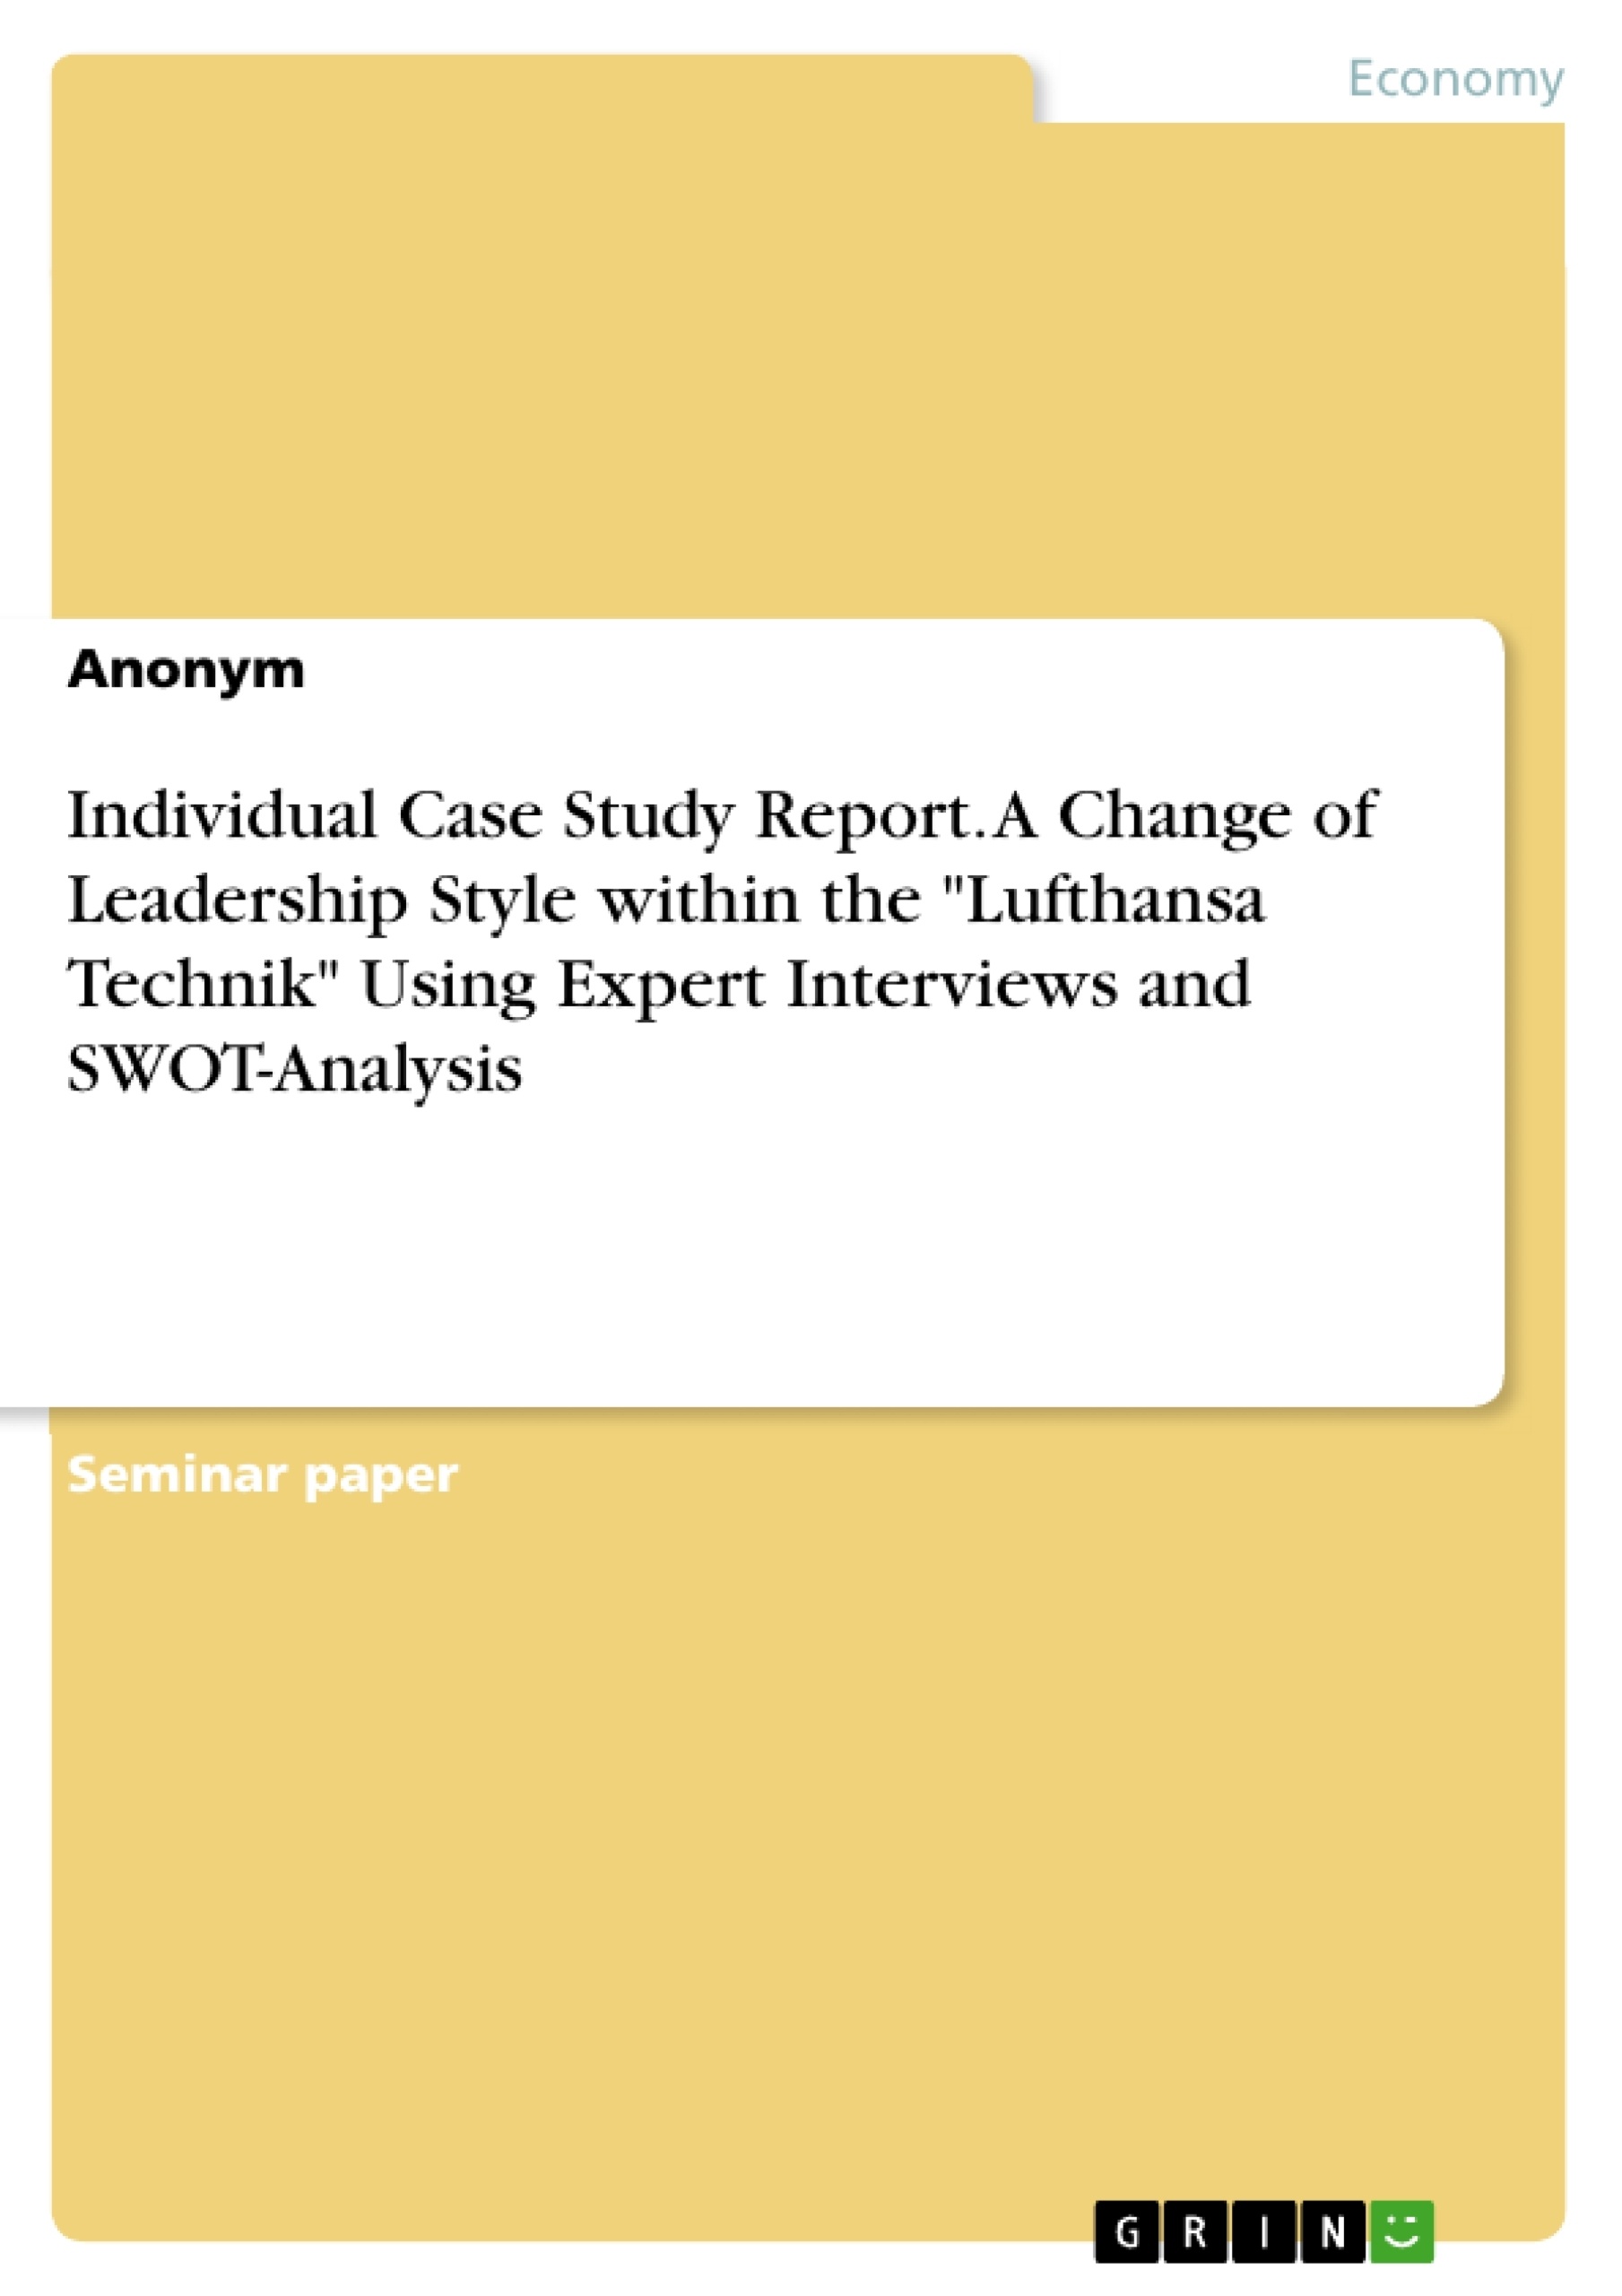 Title: Individual Case Study Report. A Change of Leadership Style within the "Lufthansa Technik" Using Expert Interviews and SWOT-Analysis